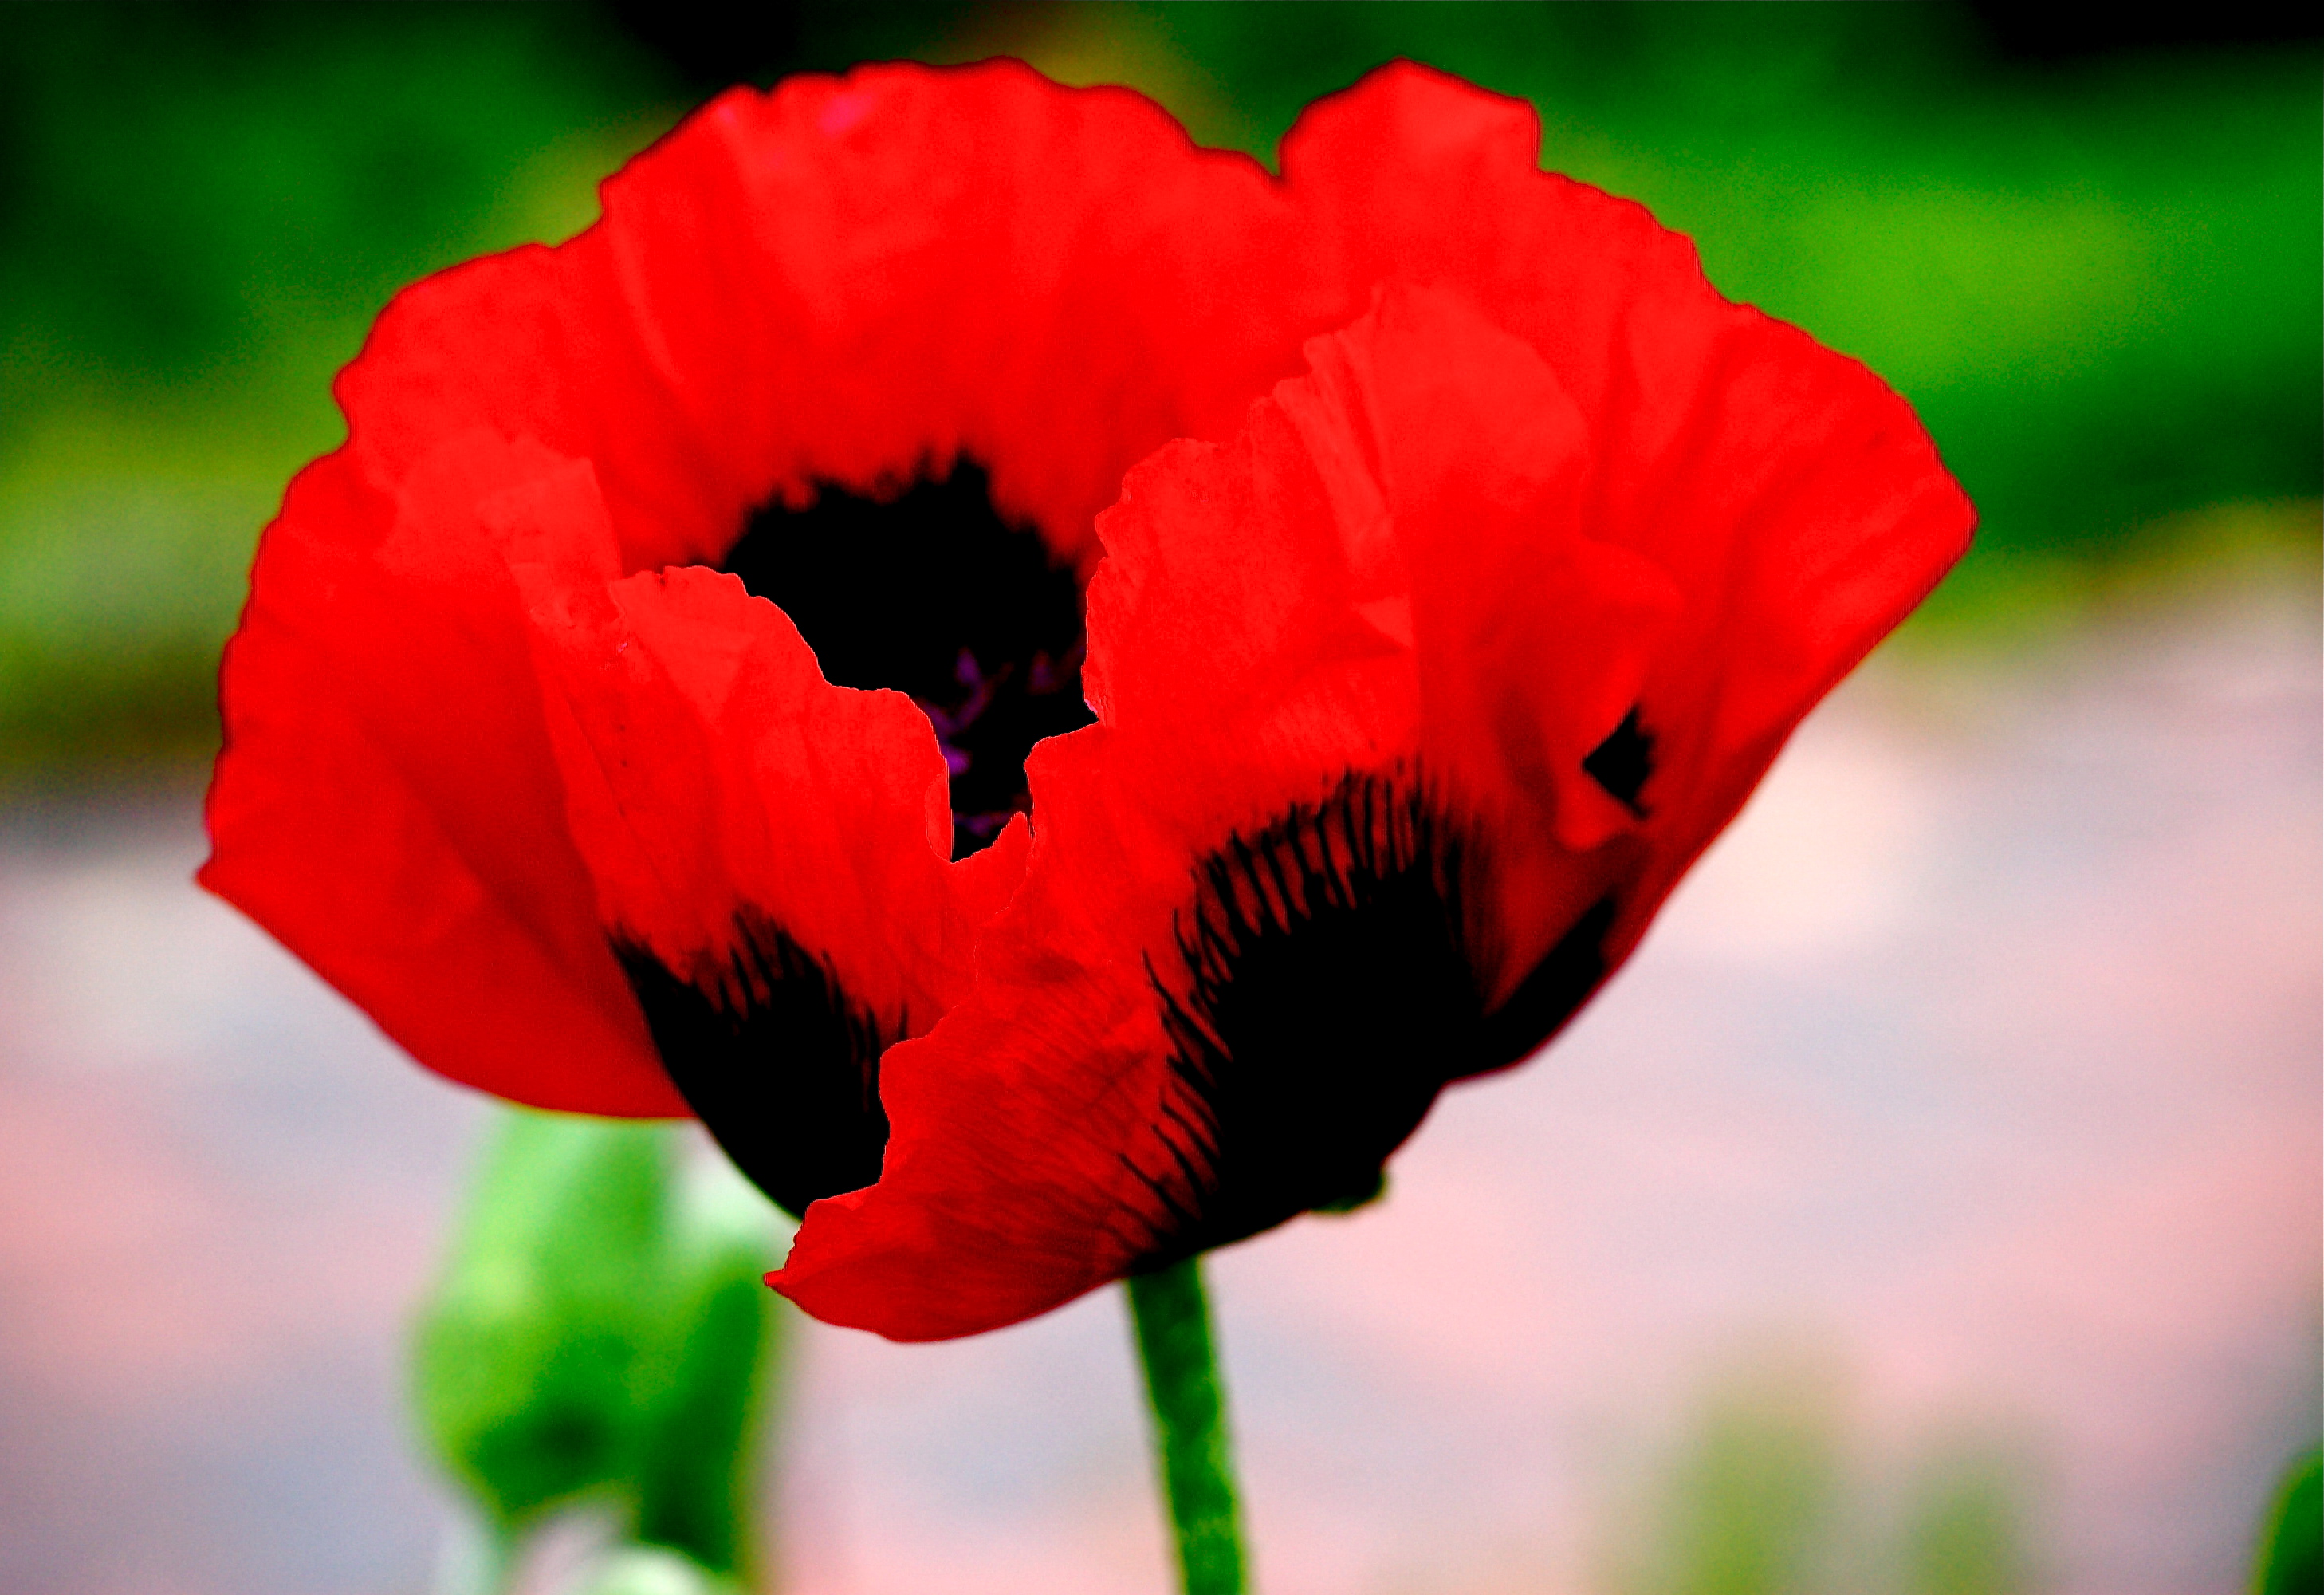 Spring's Oriental Poppy, Part One: Red with Splashes of Black | Lens ...